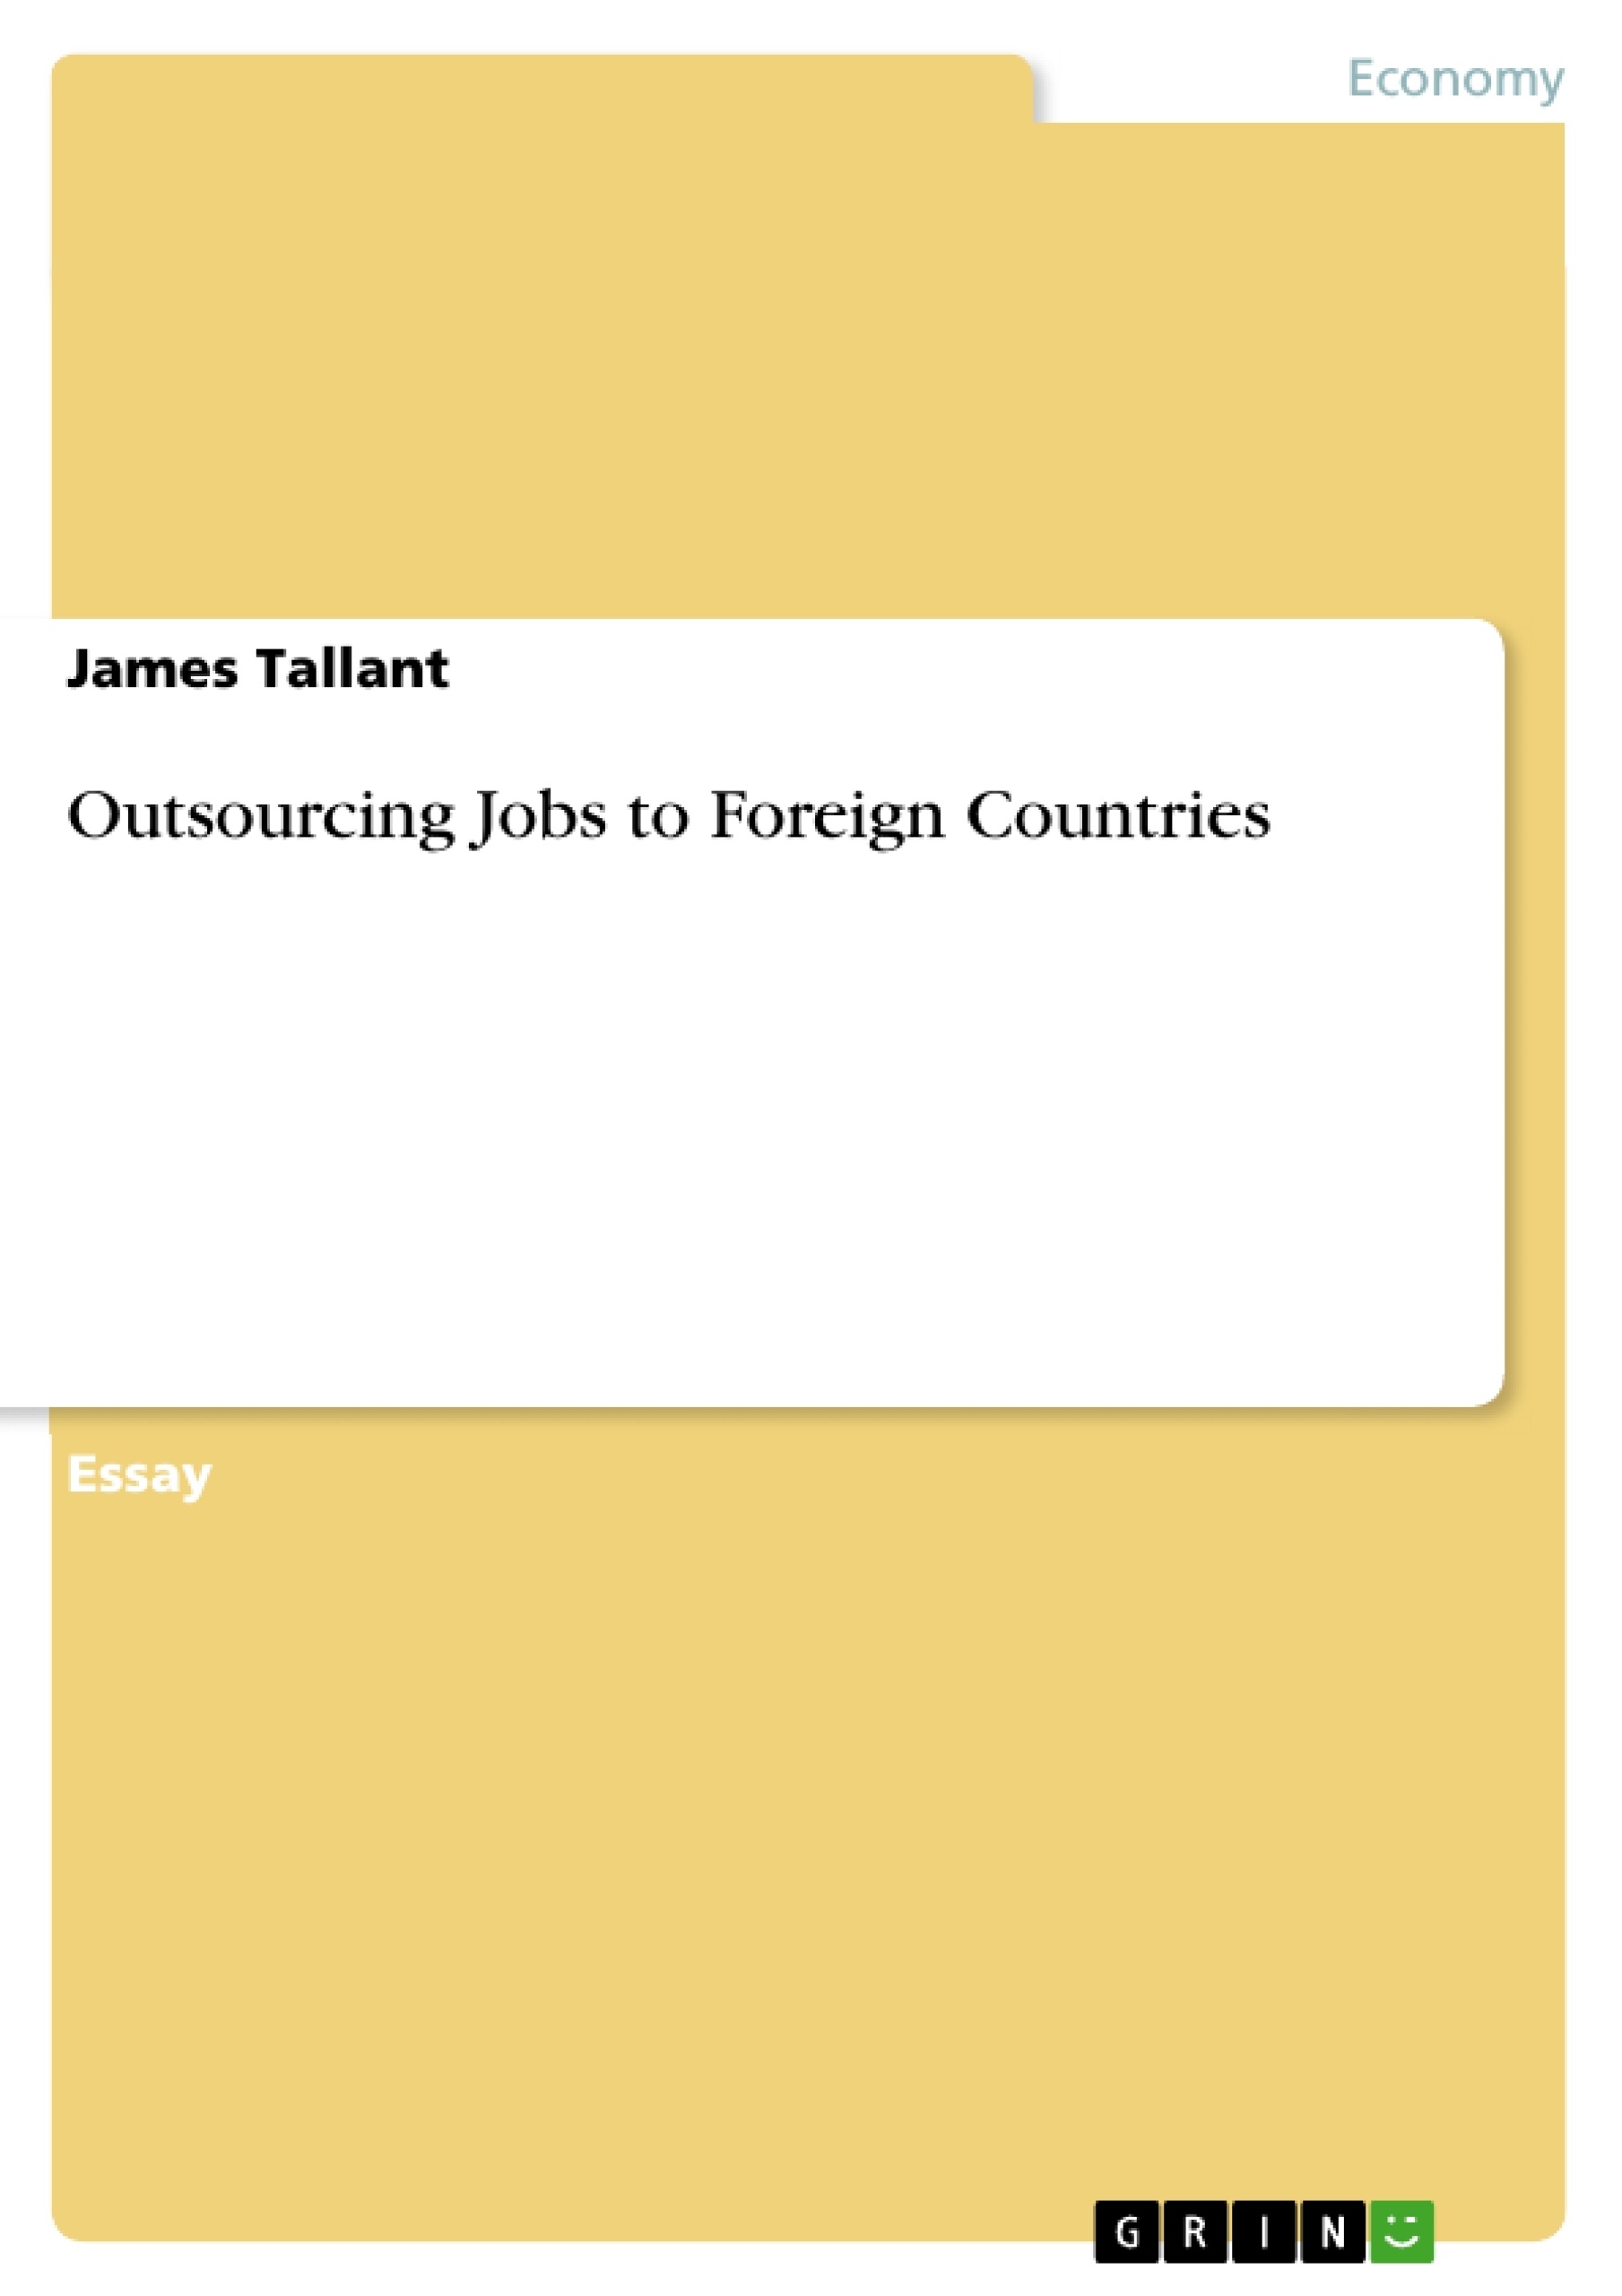 Essay on outsourcing jobs to foreign countries